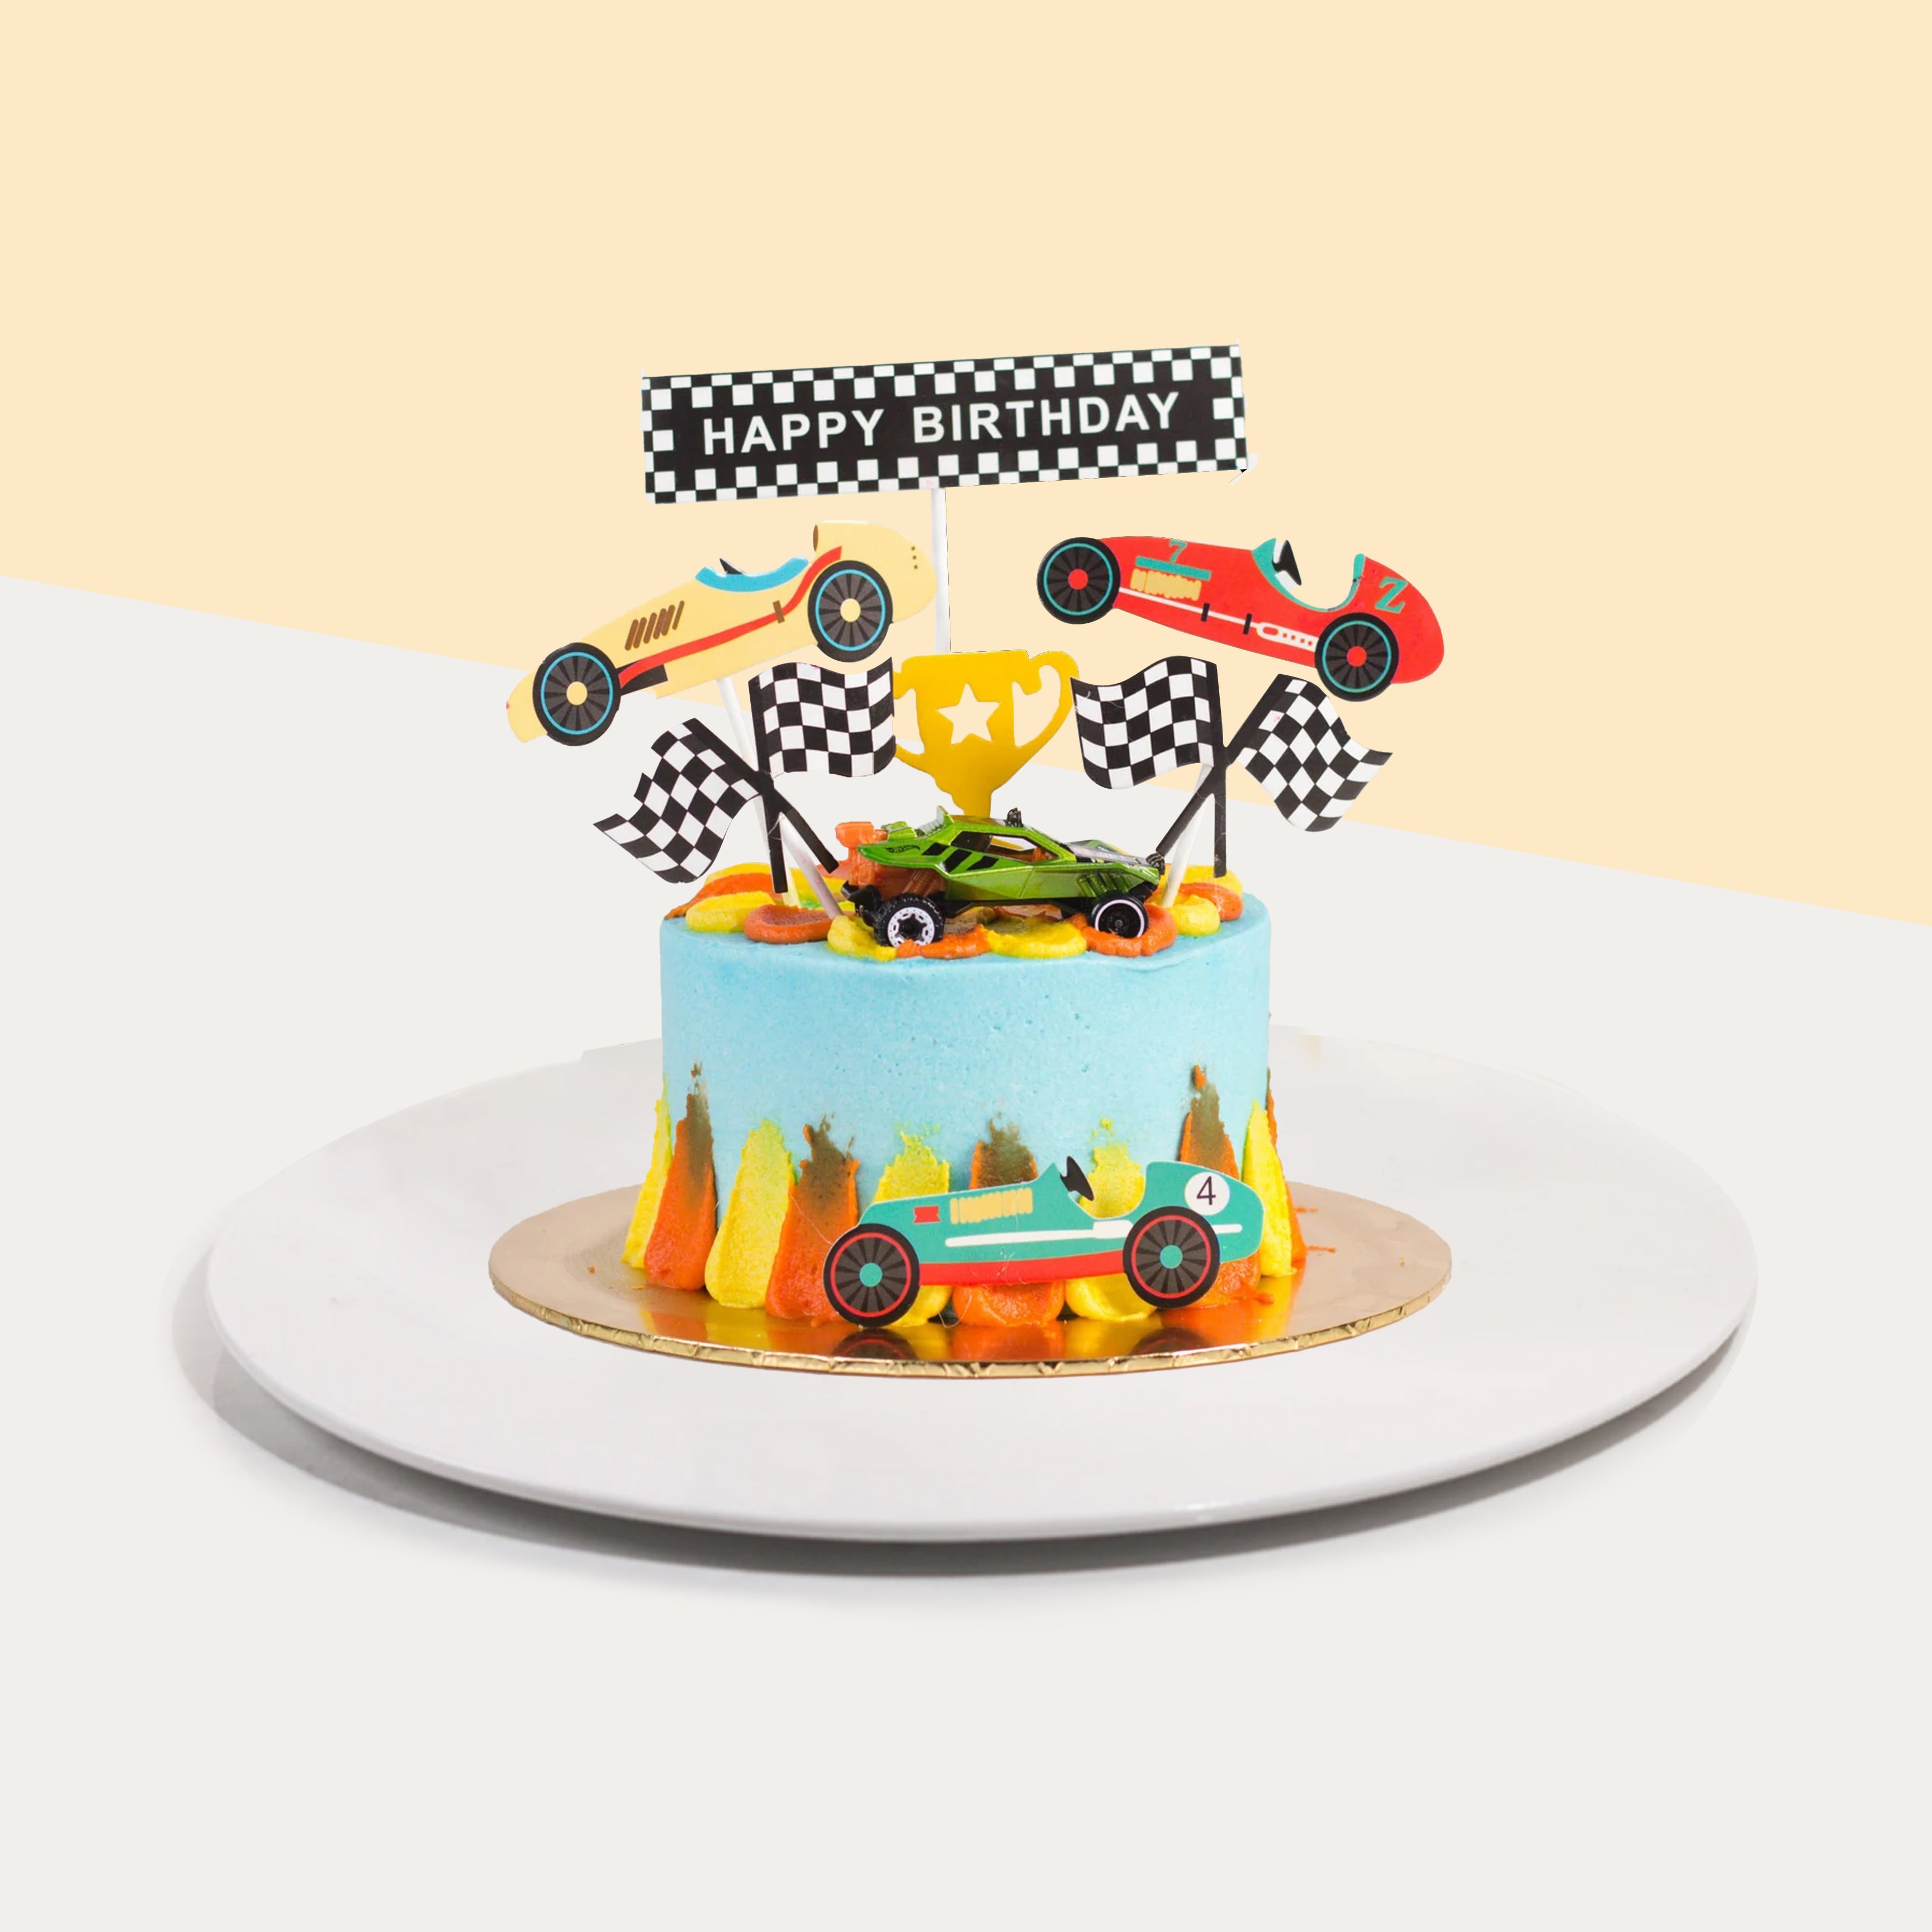 Race car cake (modeled after the... - Gwen's Cakes and Bakes | Facebook